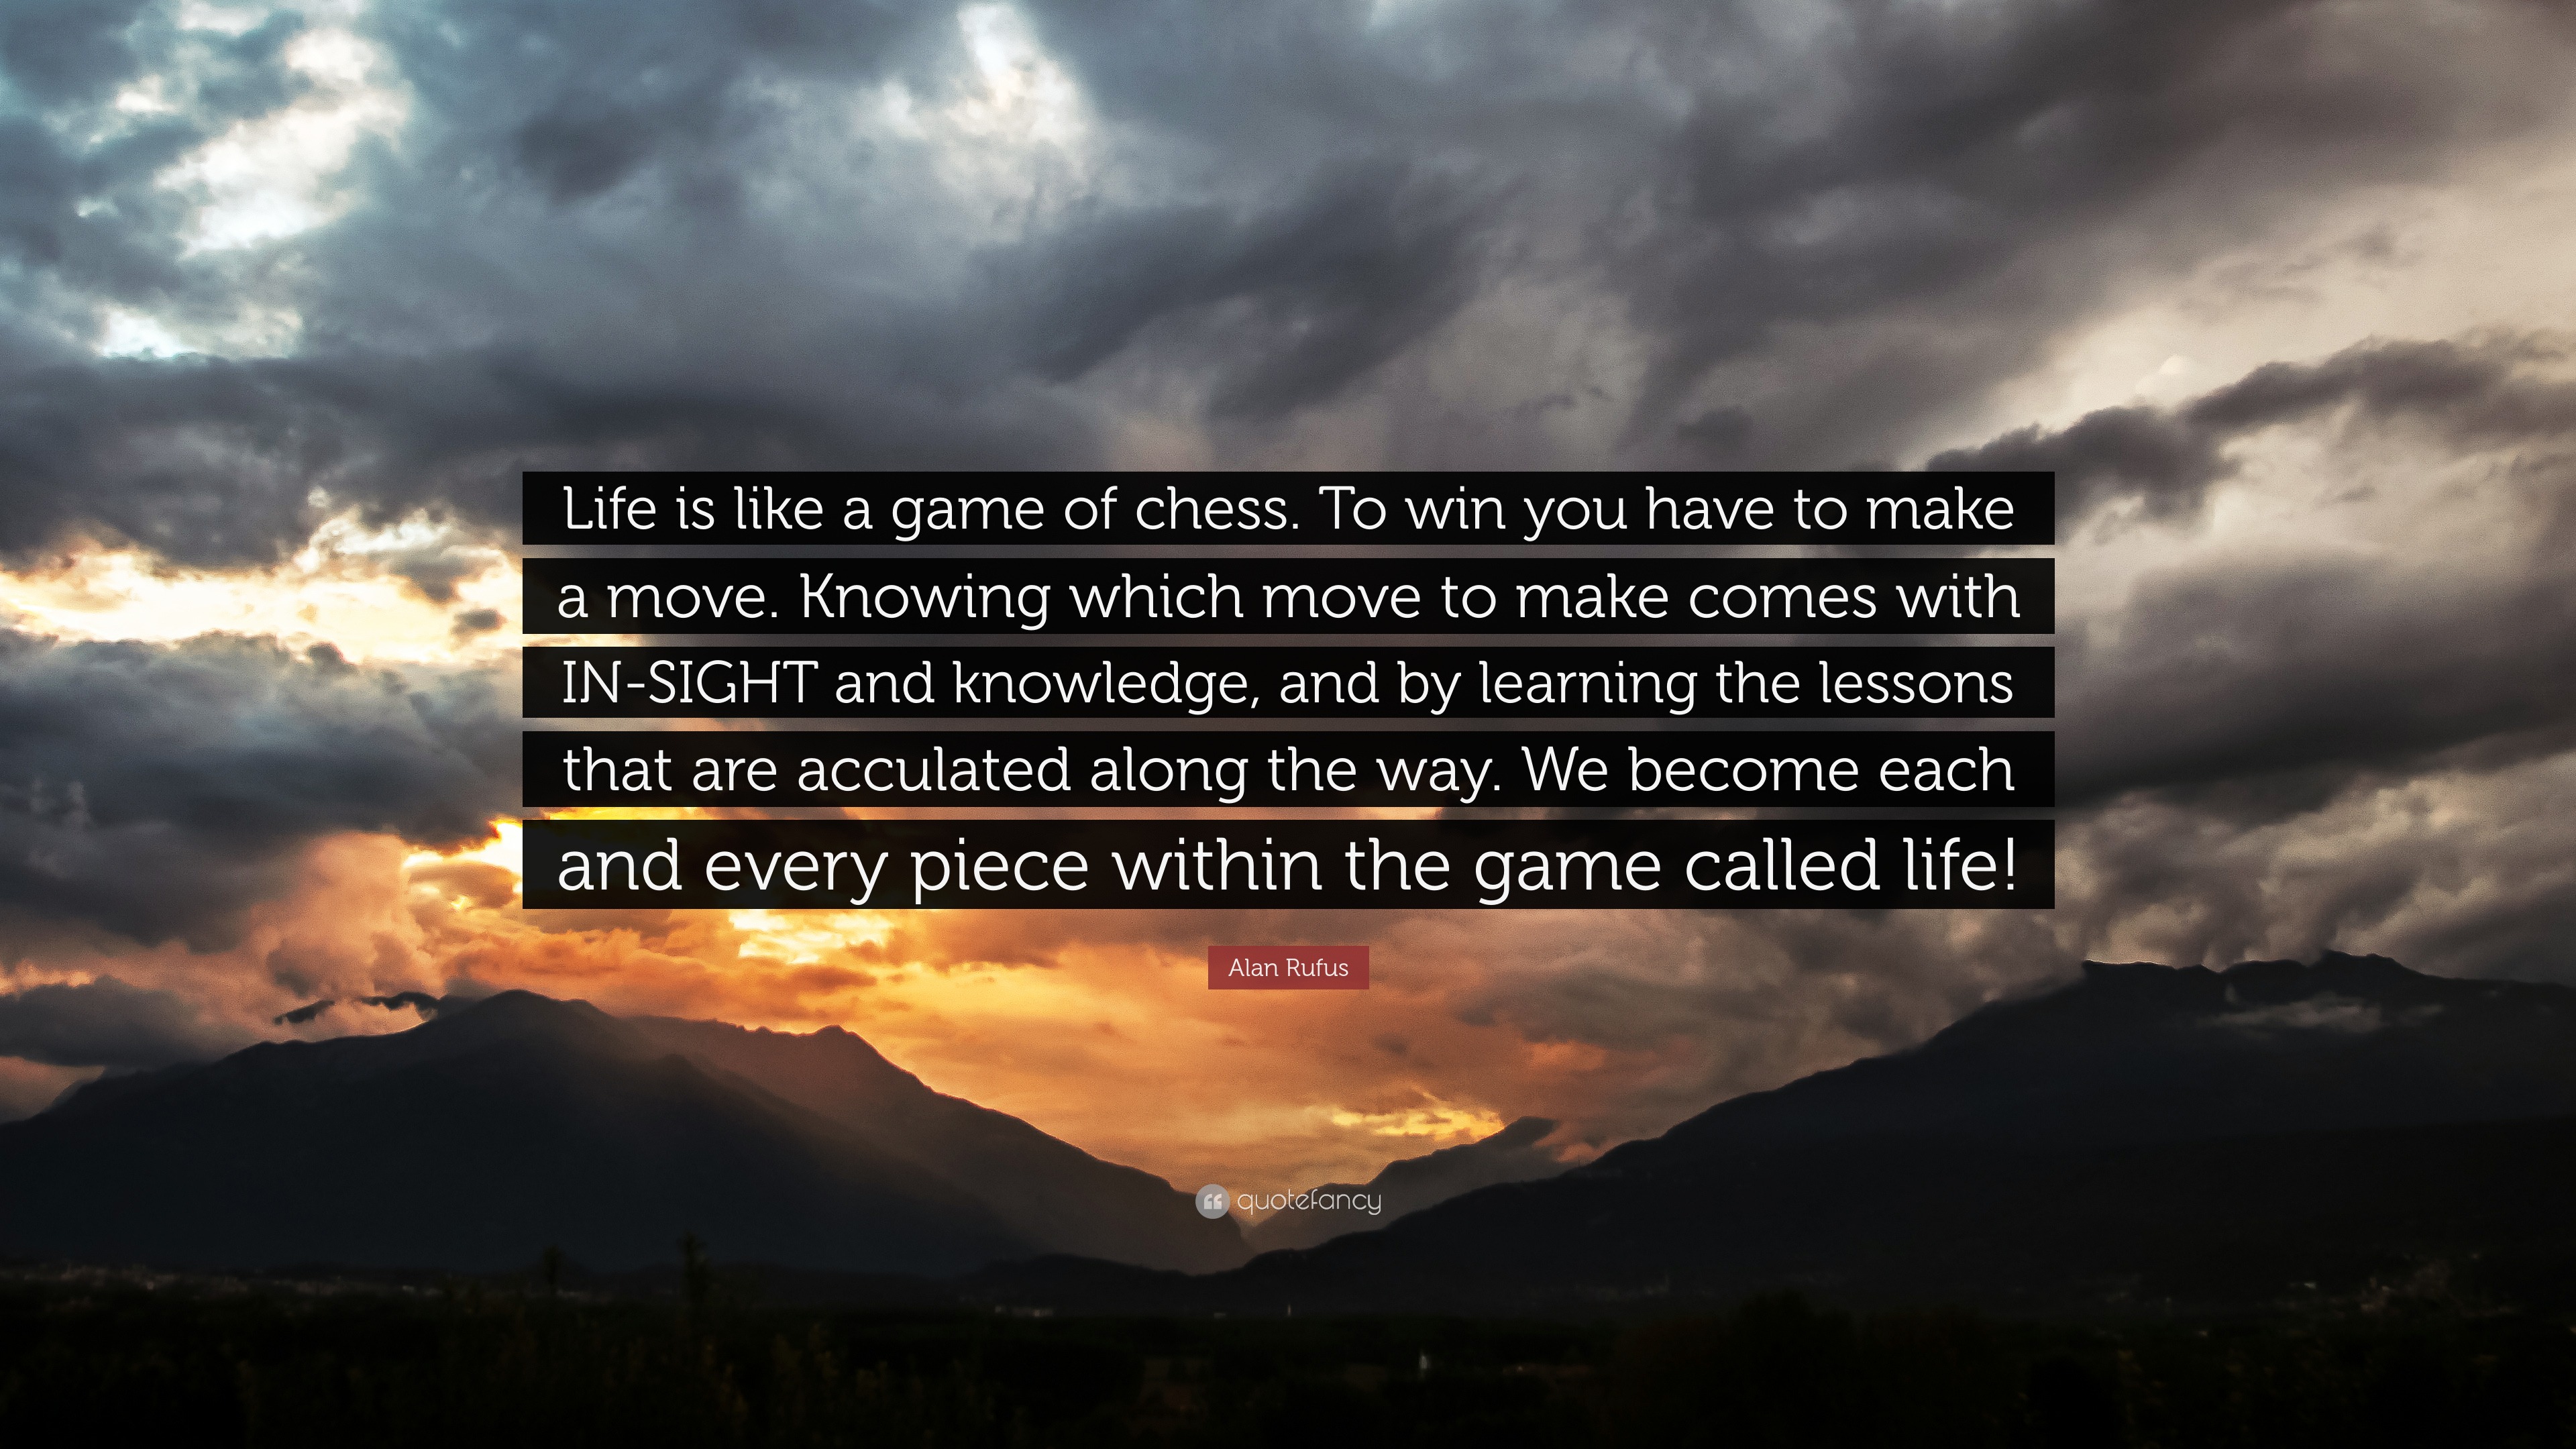 Inspiring and Positive Quotes - “Life is like a game of chess. To win you  have to make a move. Knowing which move to make comes with IN-SIGHT and  knowledge, and by